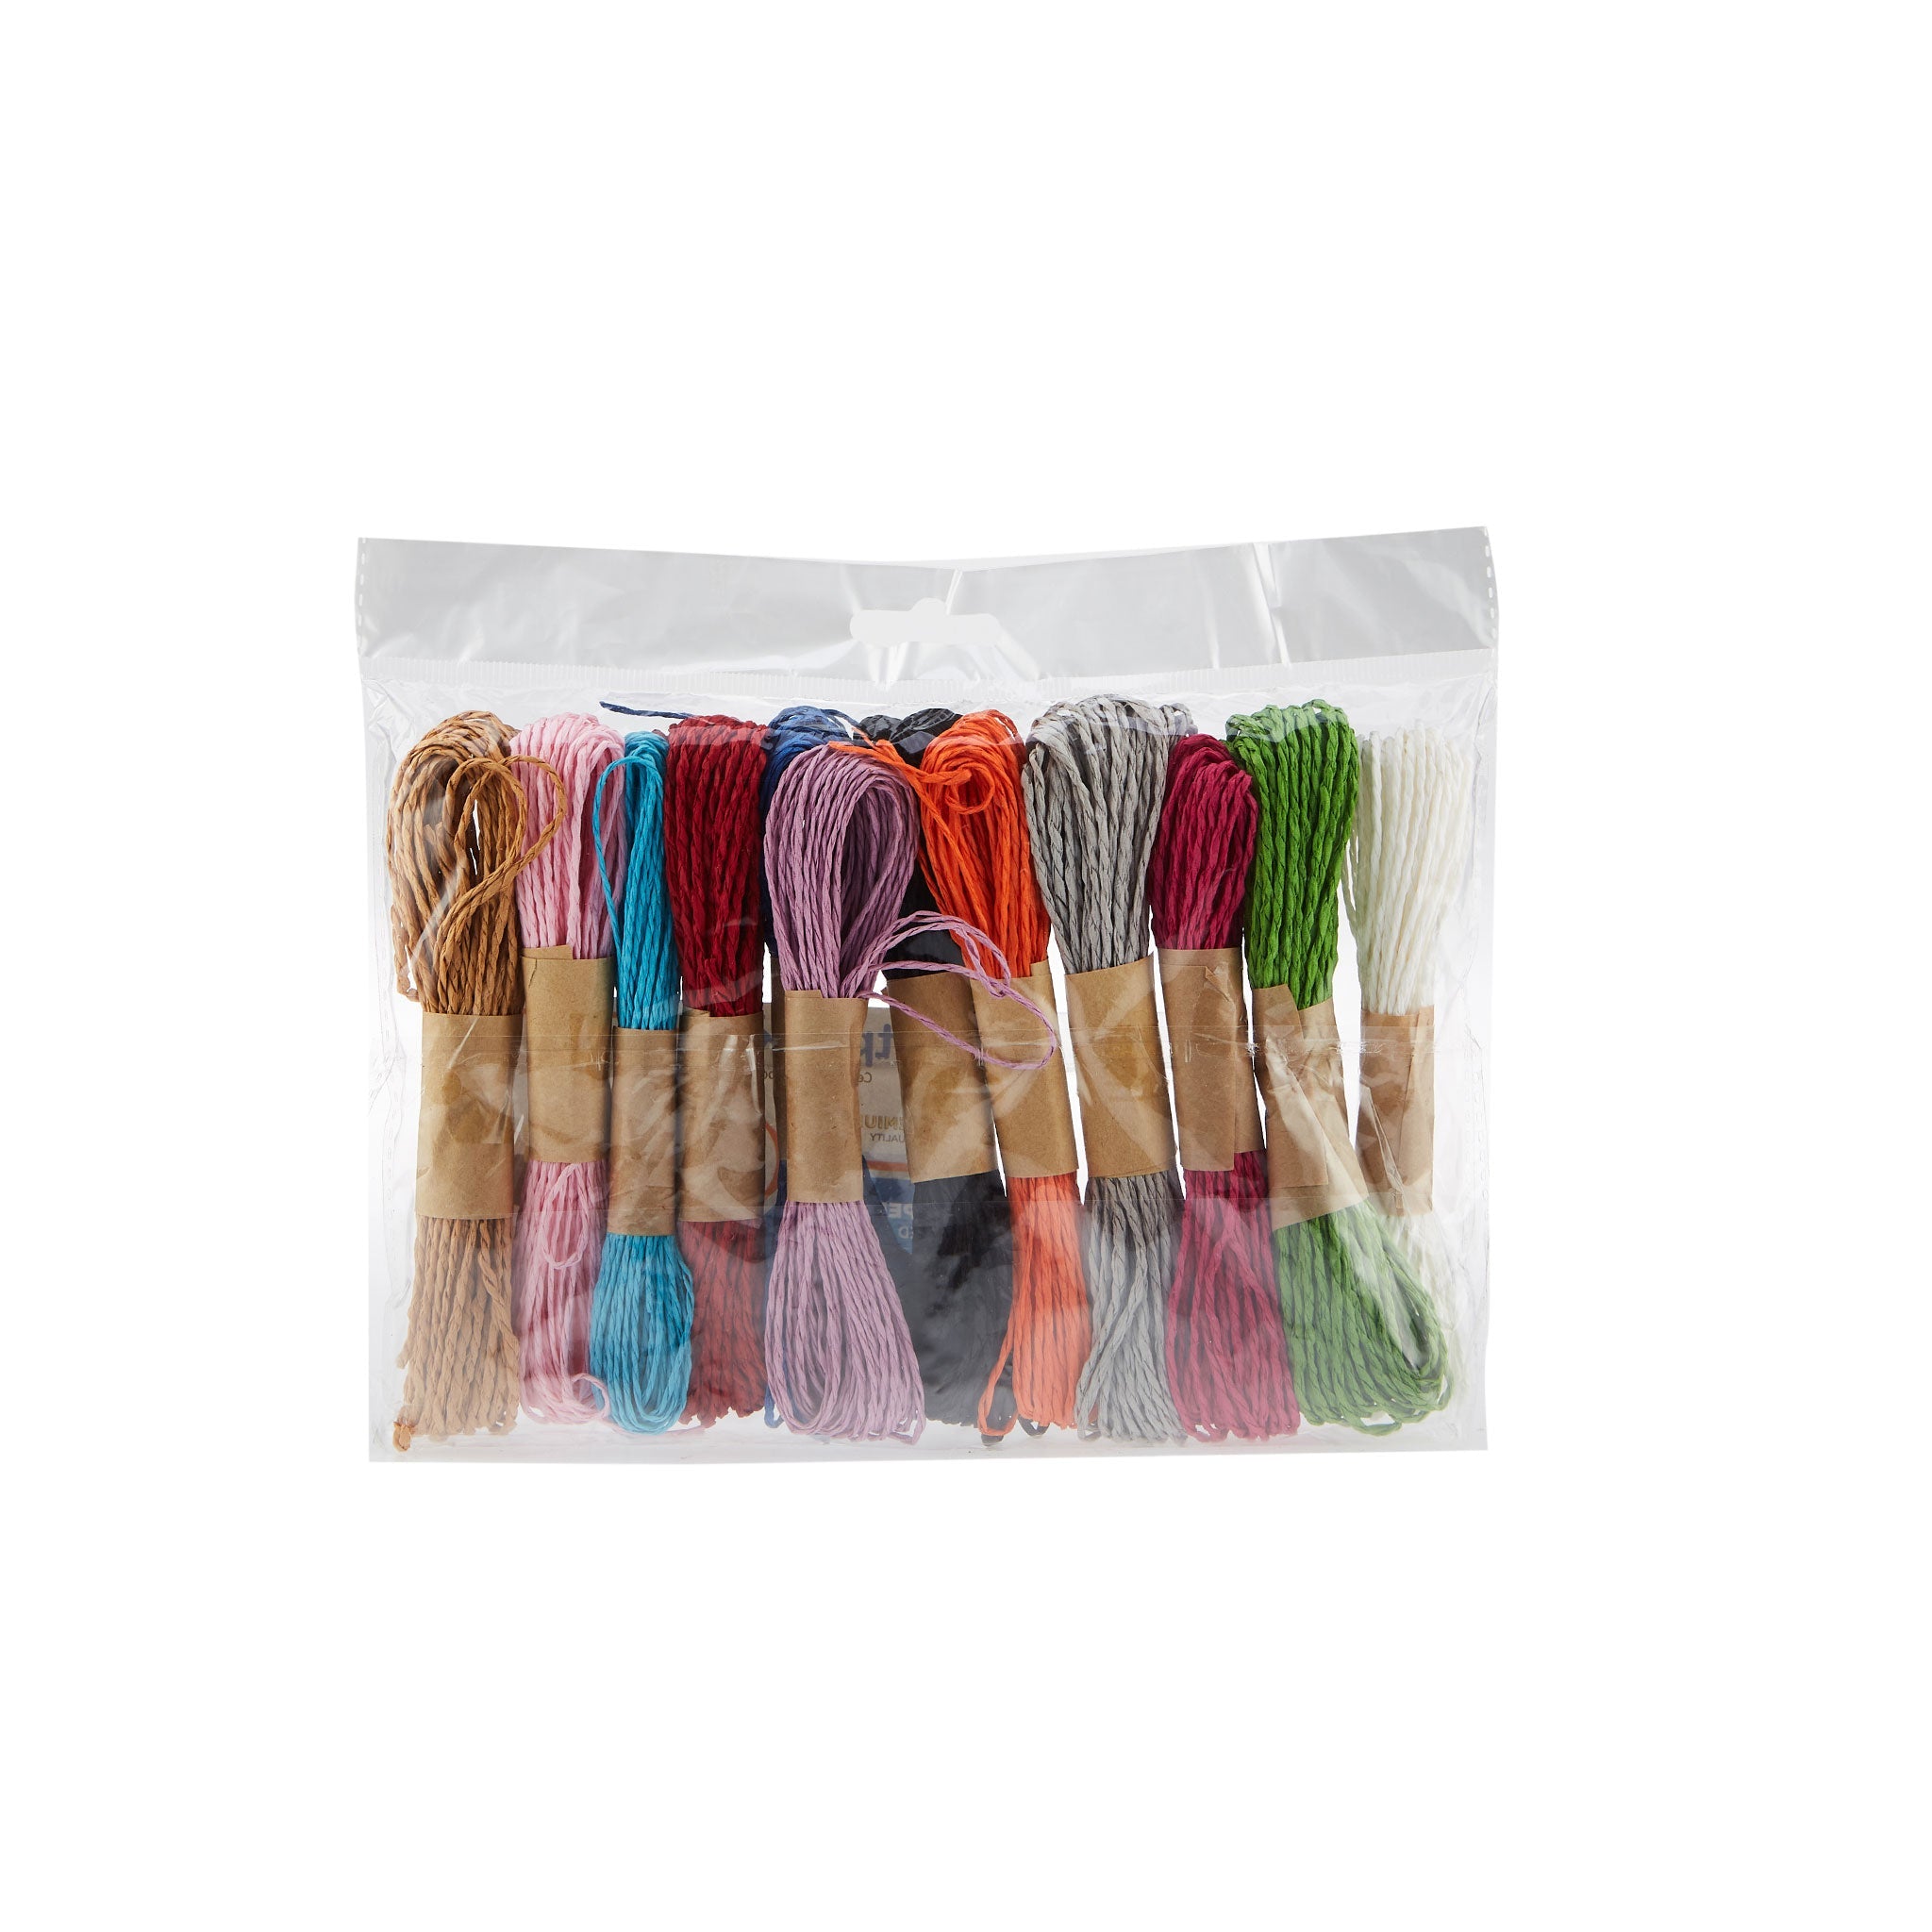 12 Rolls Paper Rope Mixed Colors (10 Meters)